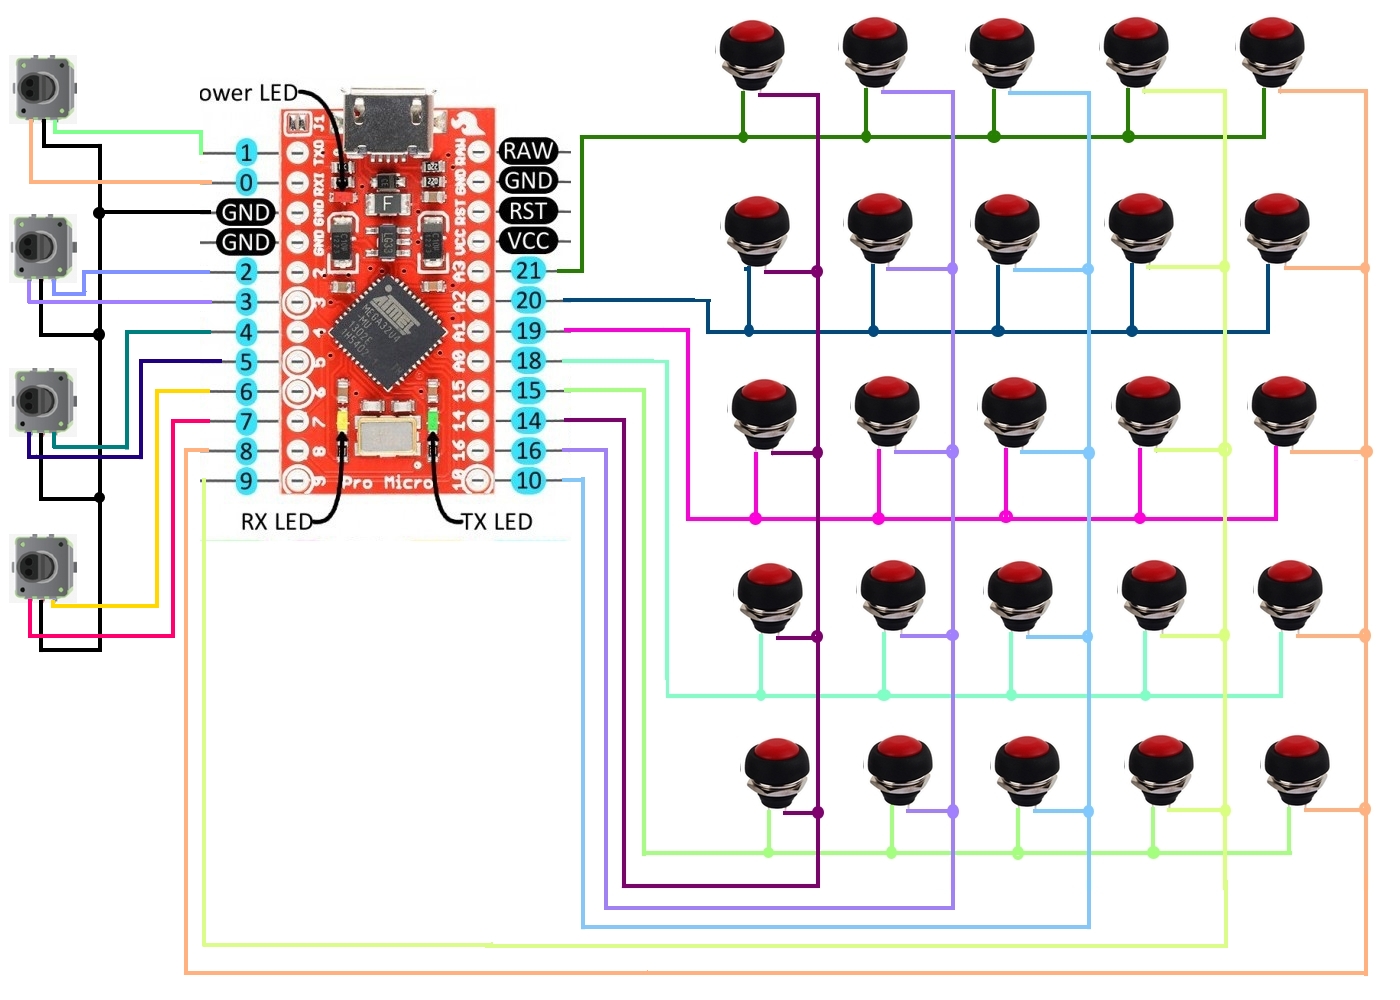 Wiring Diagram for sim racing Button Box - Project Guidance - Arduino Forum